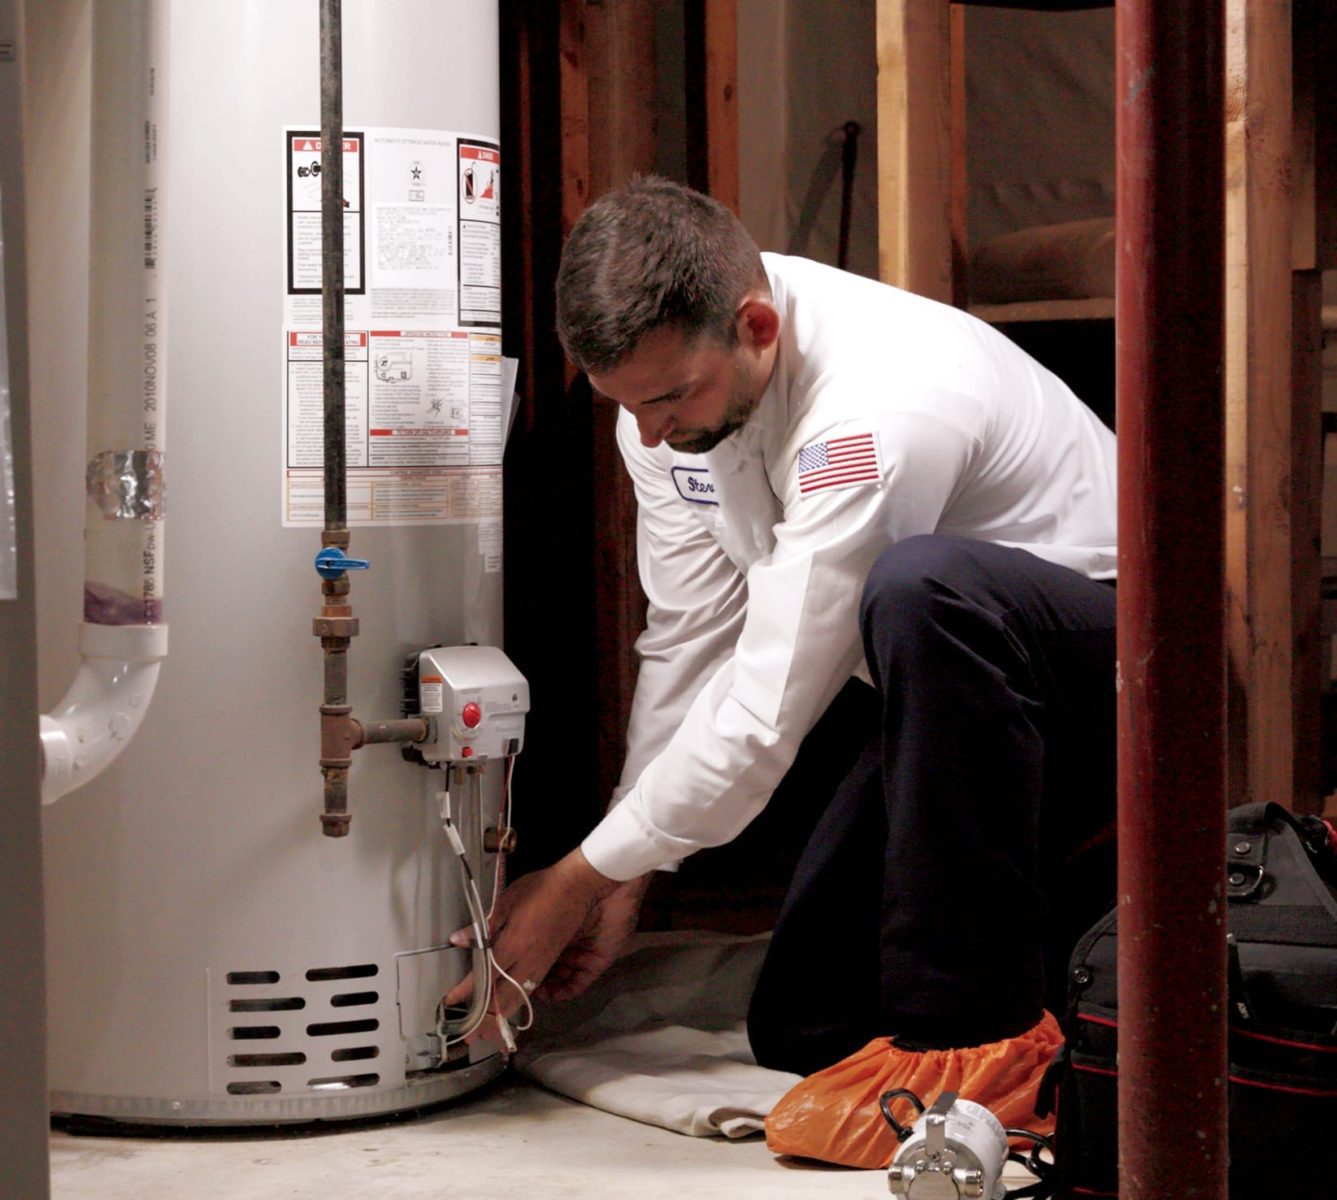 Water Heater Safety Tips One Should Know